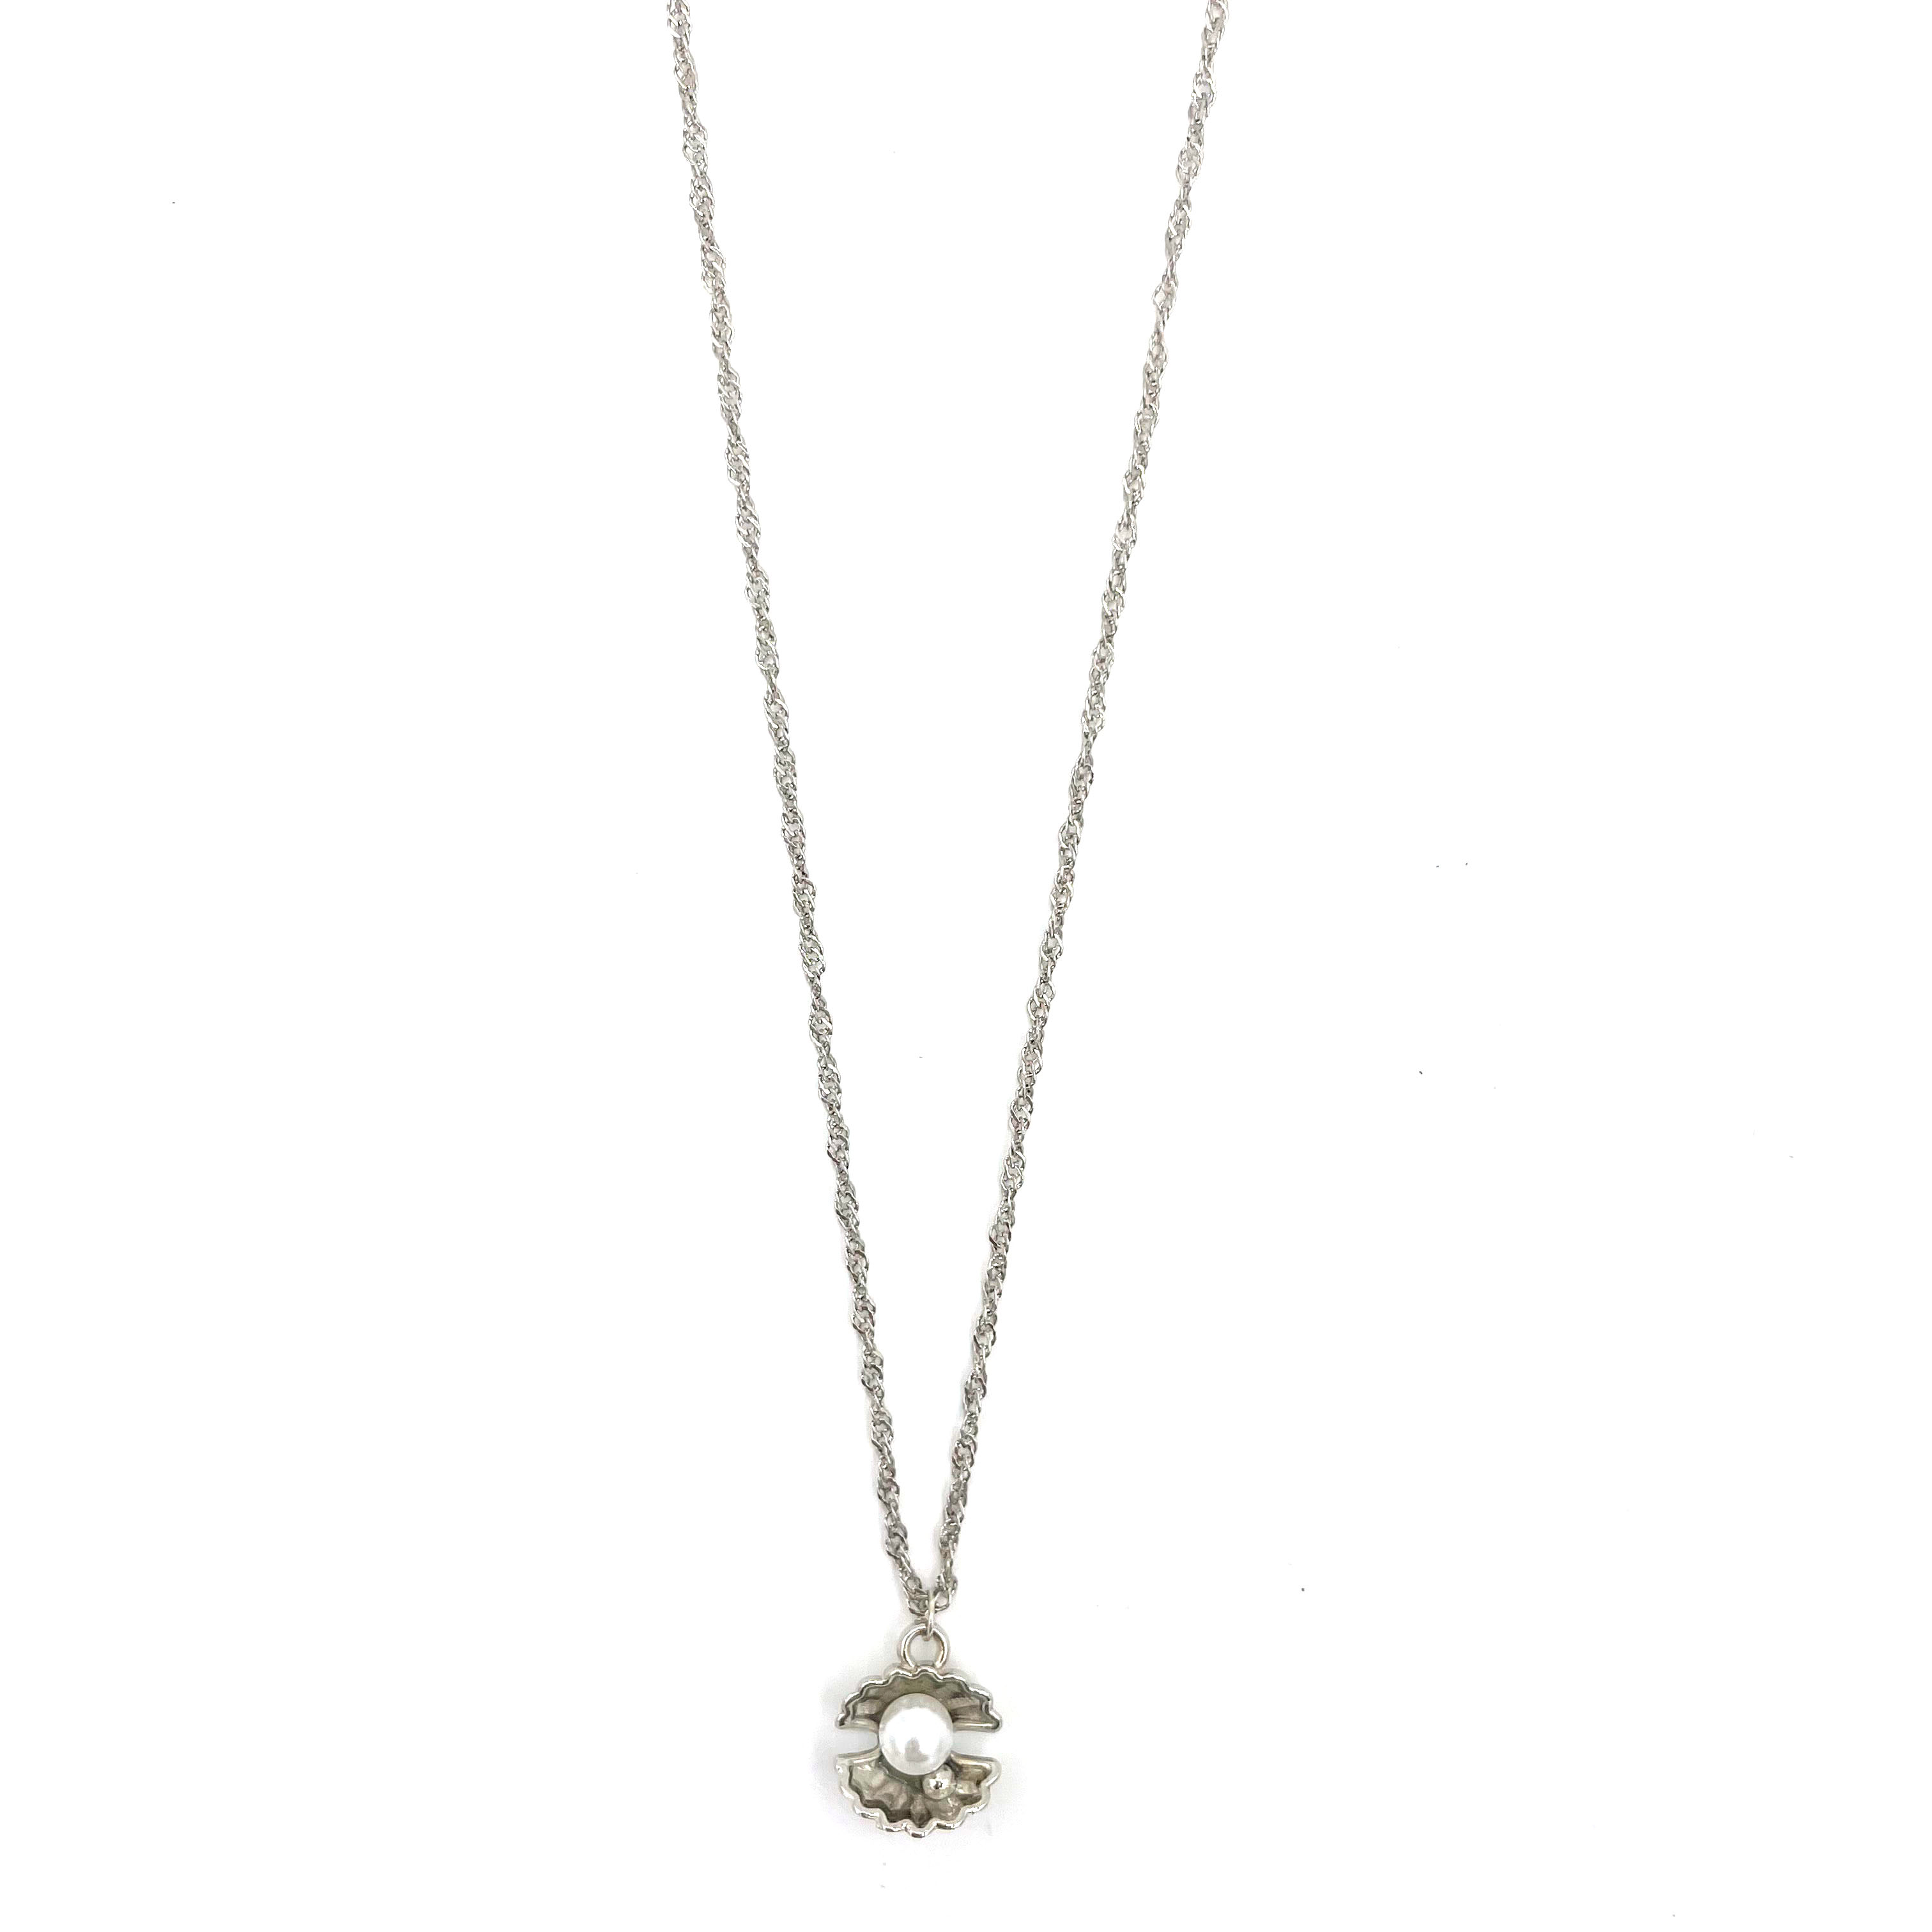 Pearl oyster necklace